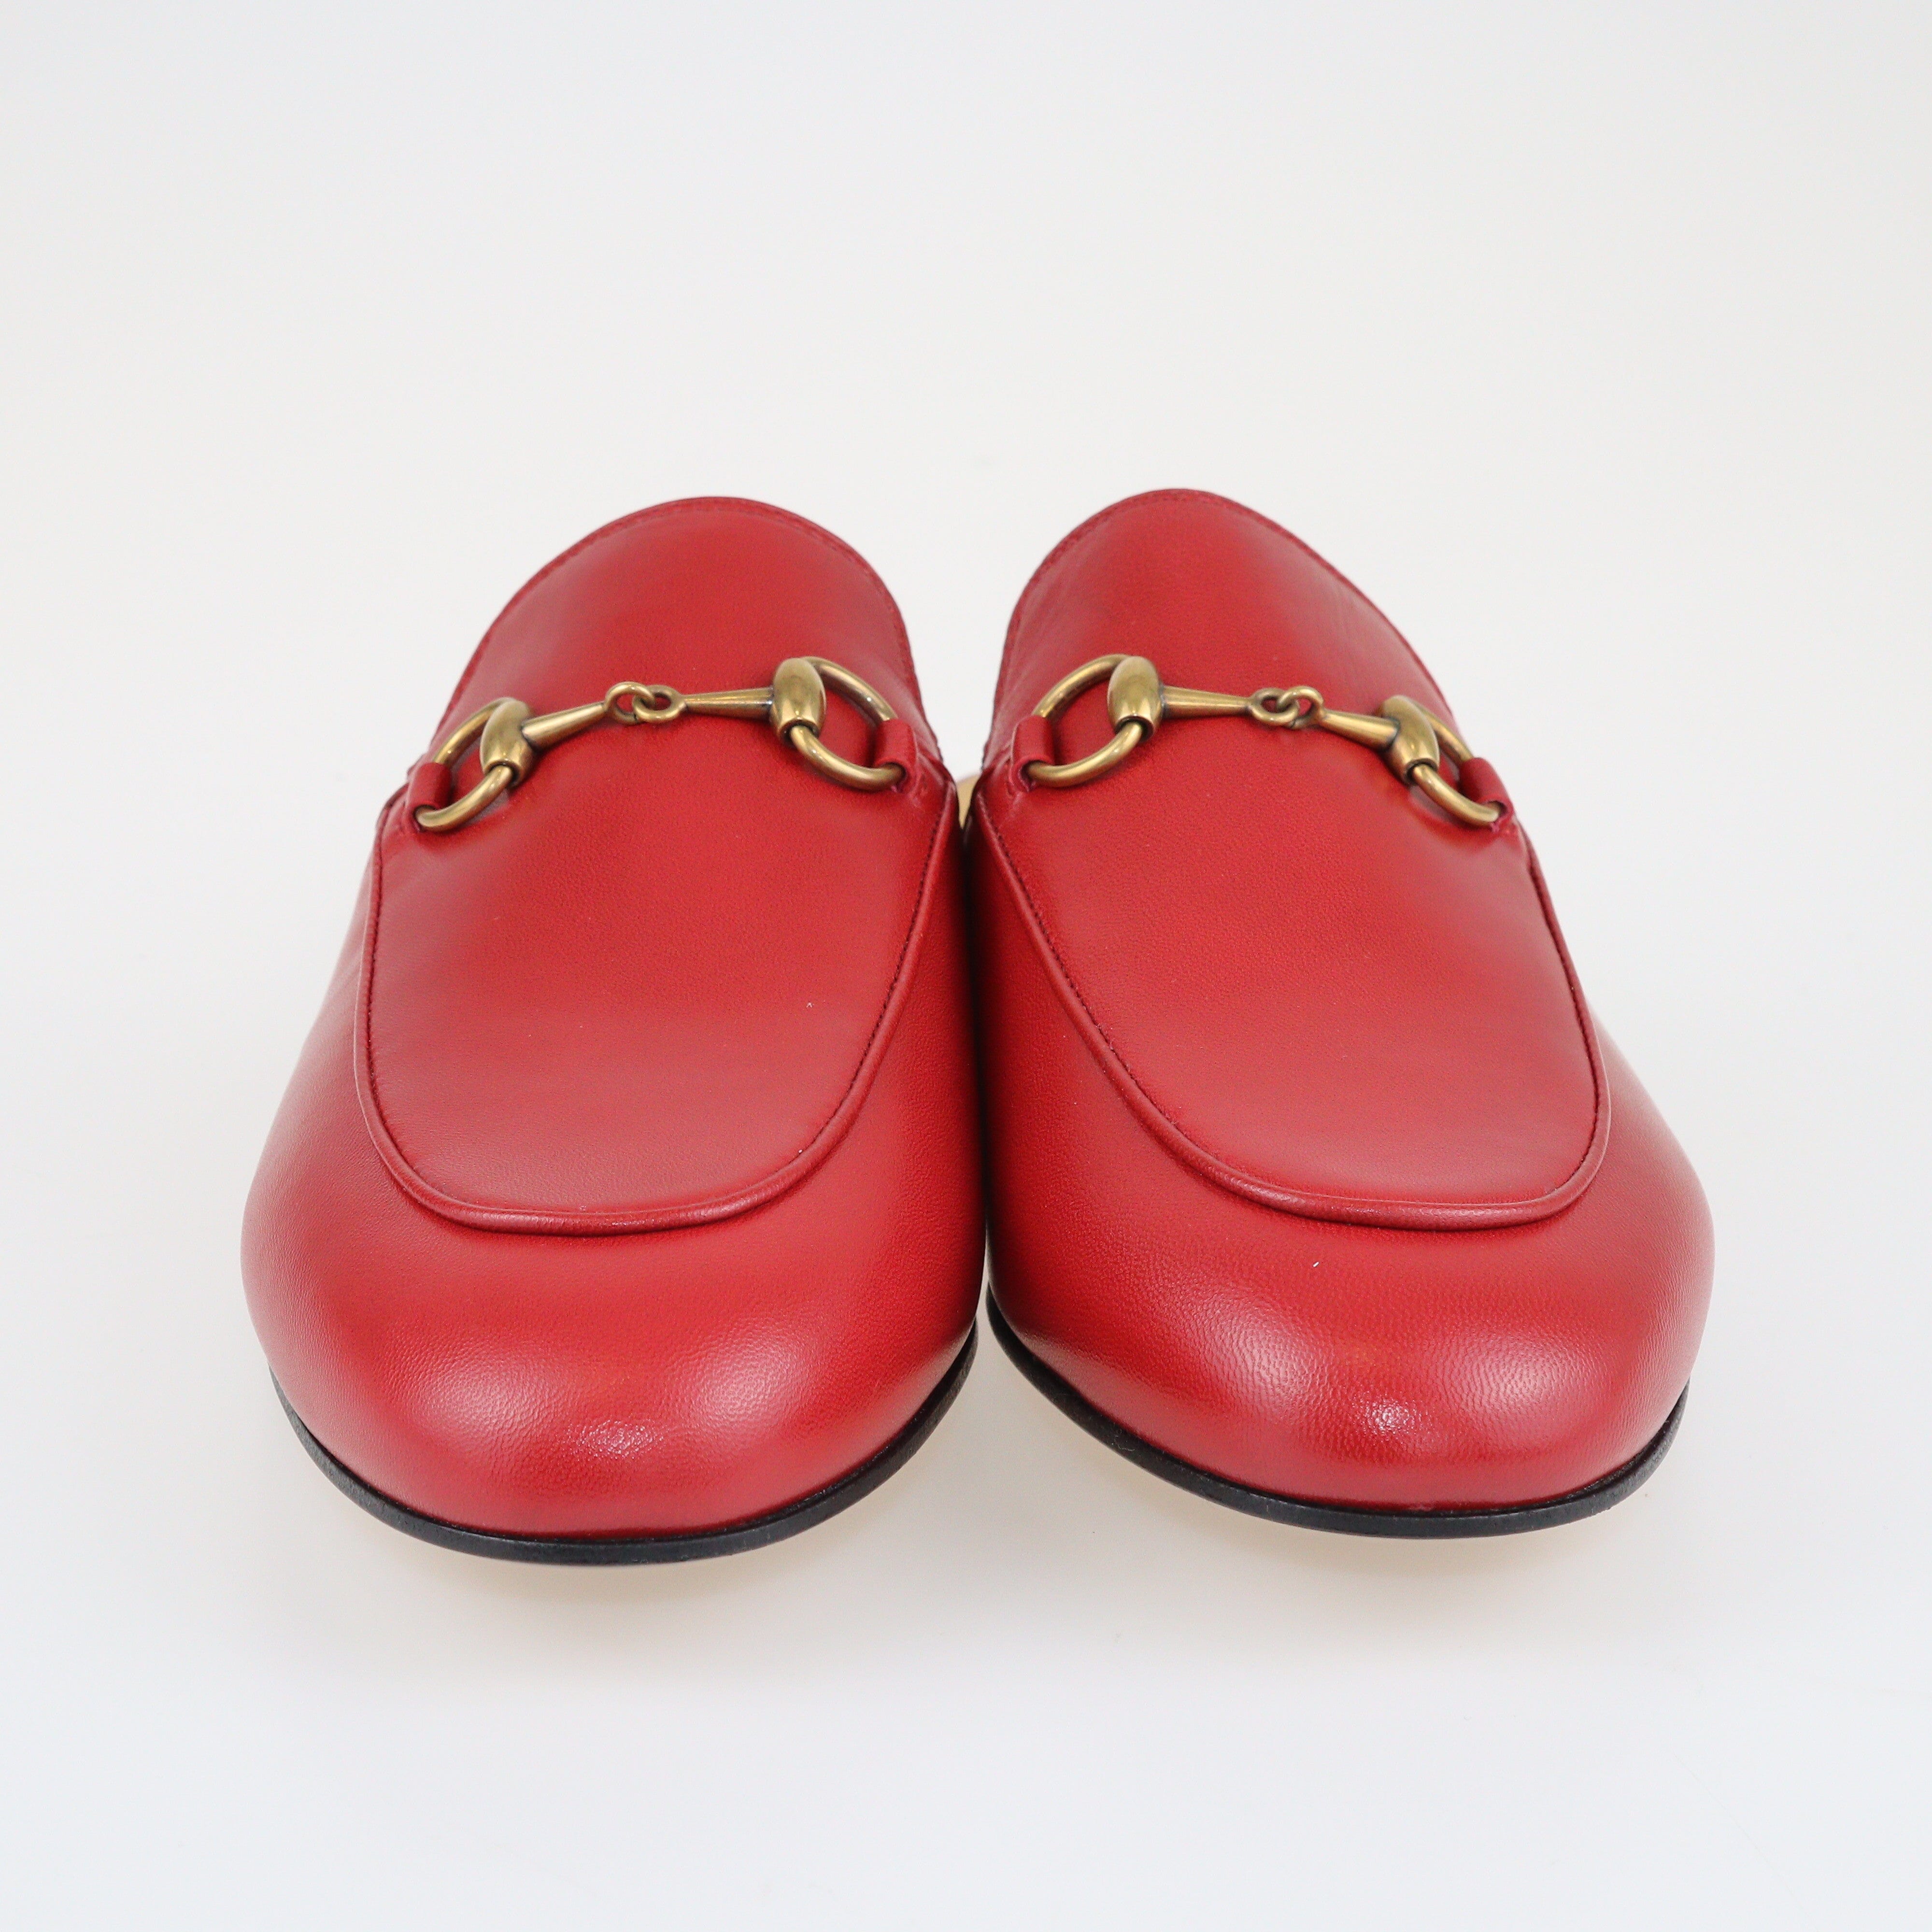 Red Princetown Horsebit Mules Shoes Gucci 